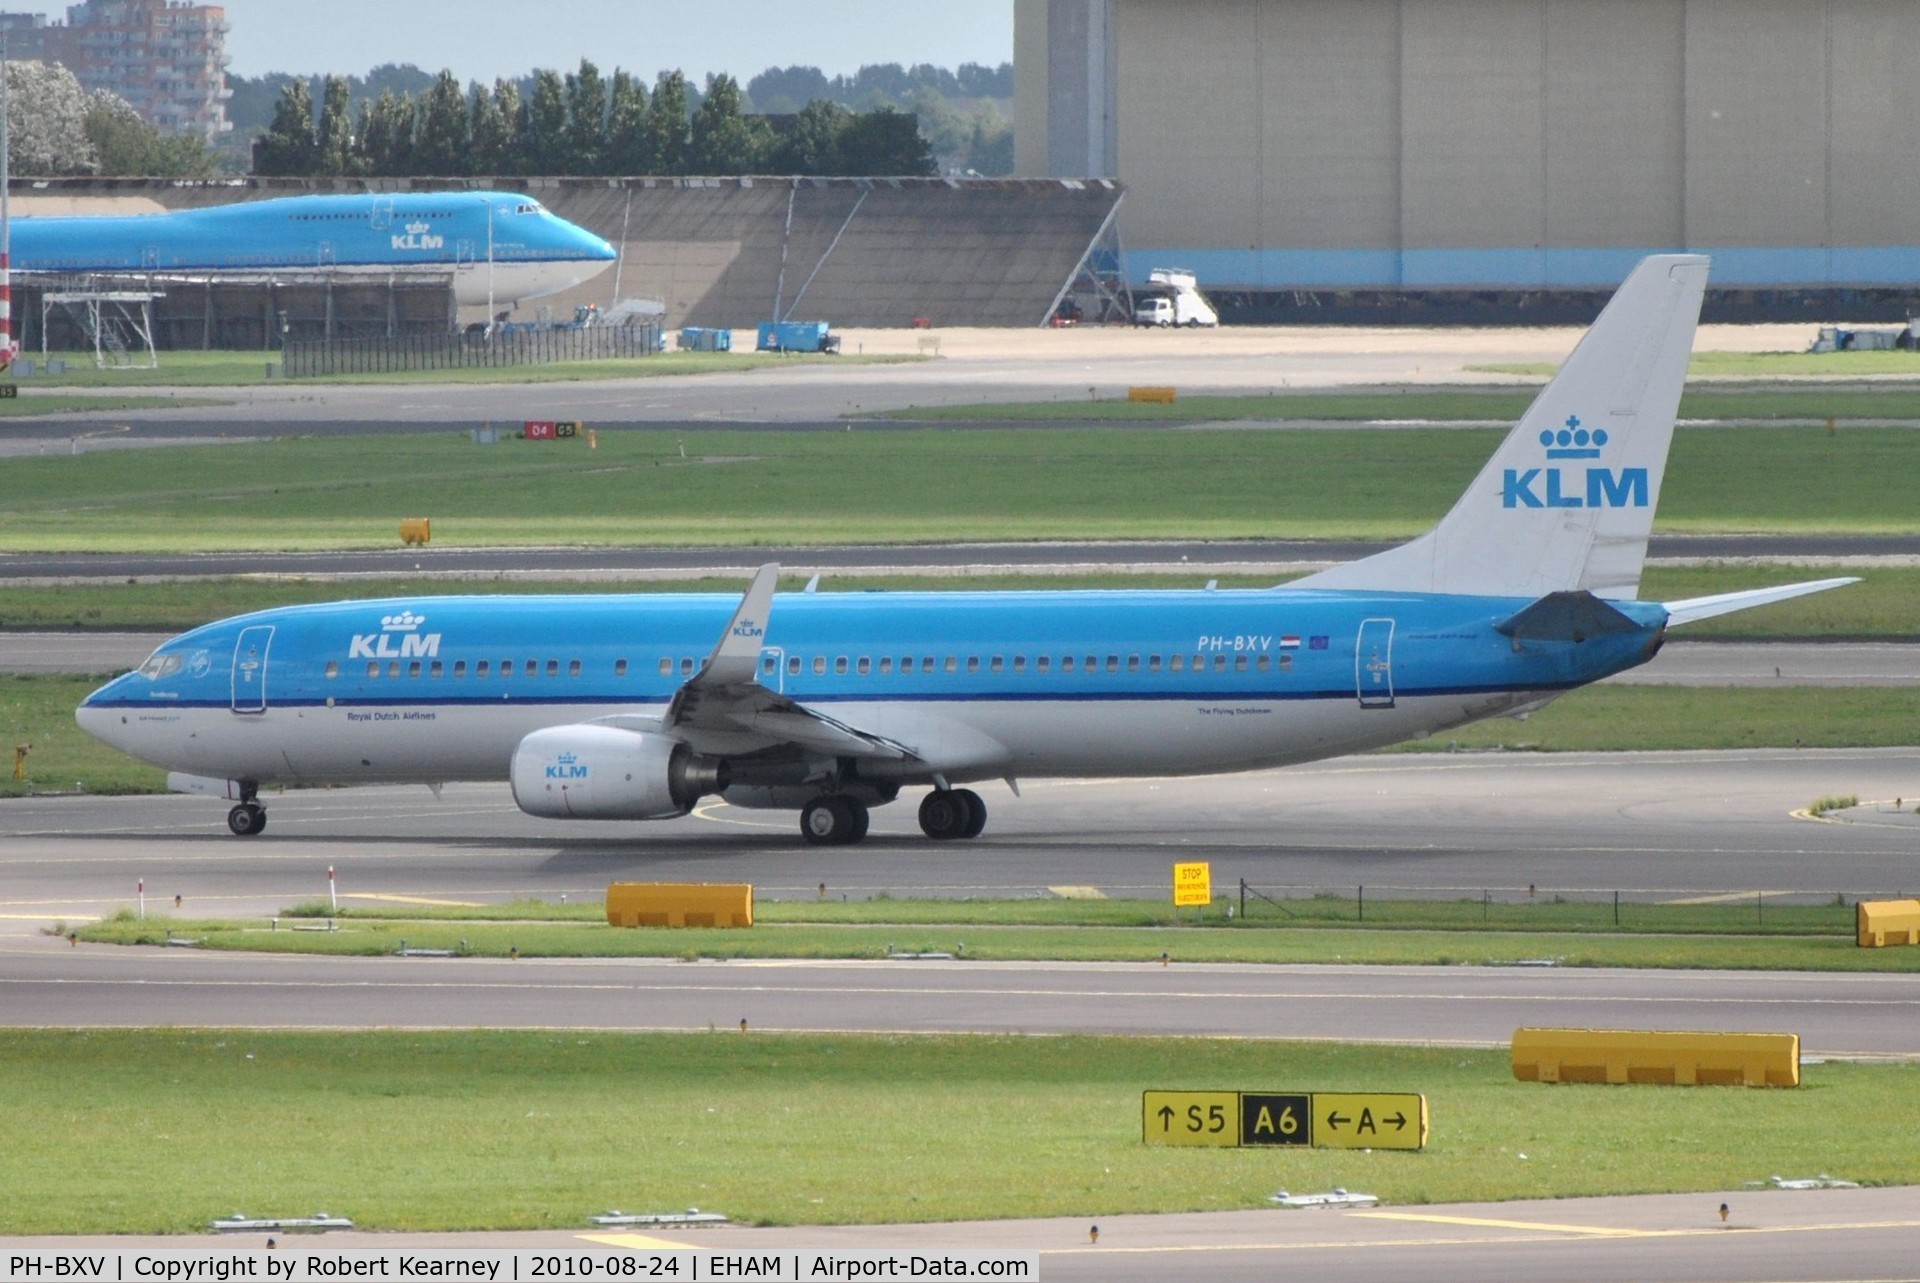 PH-BXV, 2007 Boeing 737-8K2 C/N 30370, KLM taxiing for departure